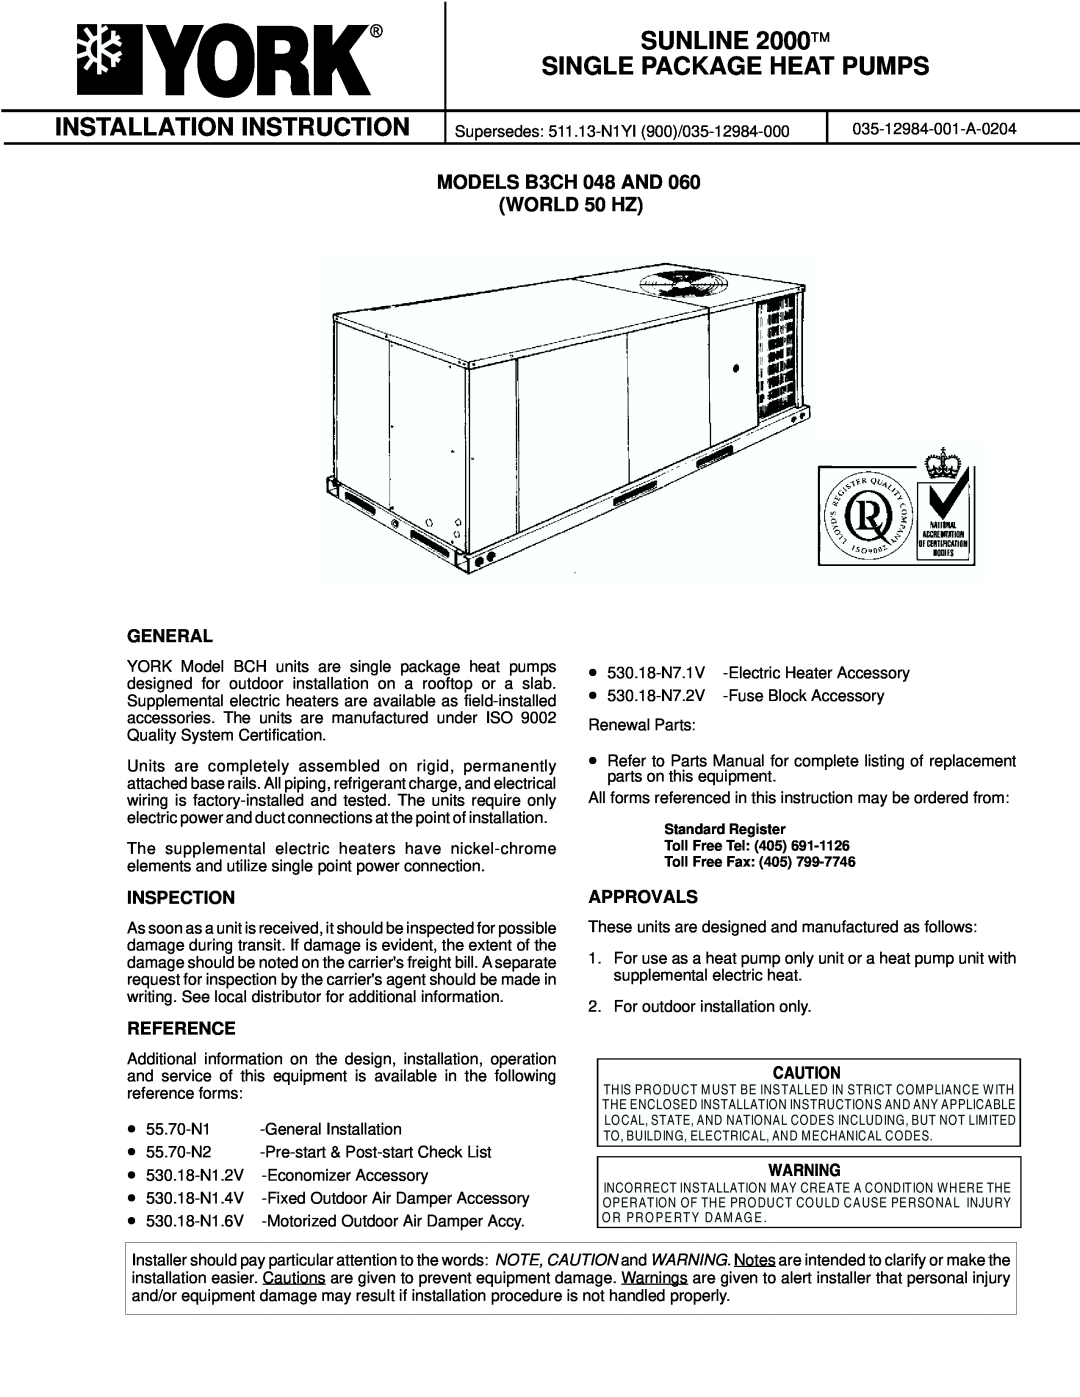 York B3CH 048 and 060 installation instructions SUNLINE 2000 SINGLE PACKAGE HEAT PUMPS, Installation Instruction, General 